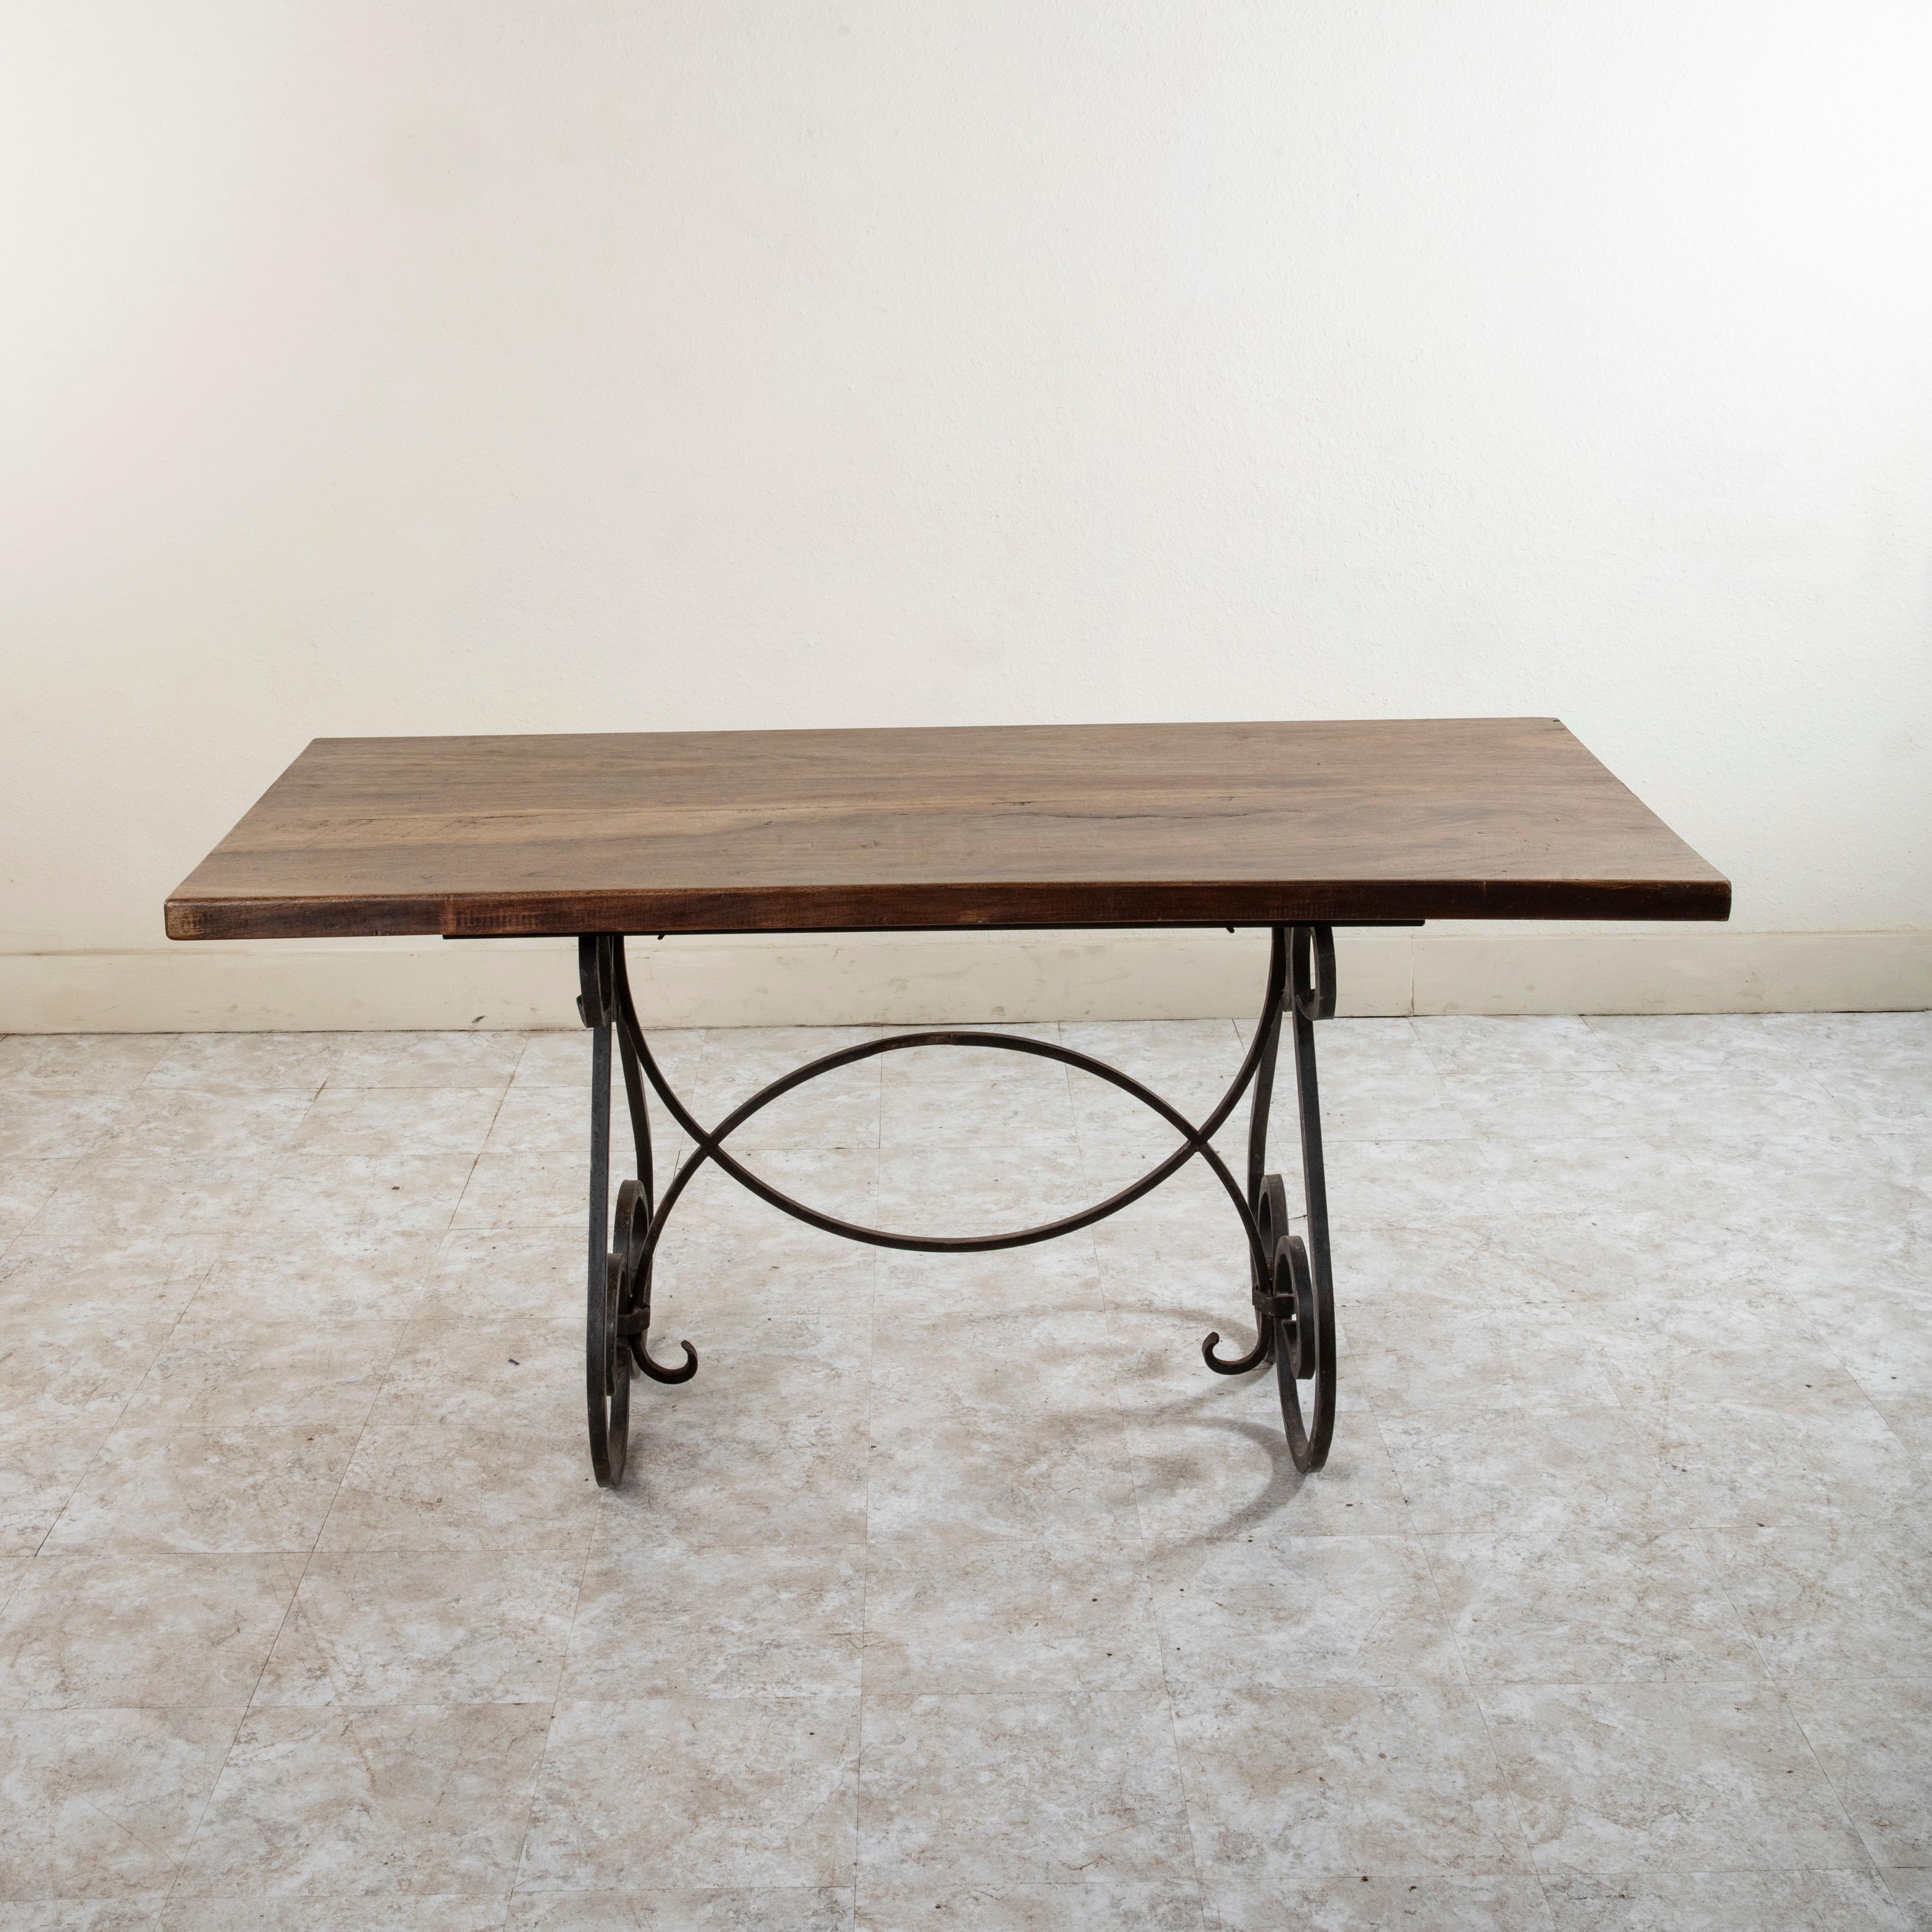 This mid twentieth century French artisan made table features a solid 1.75 inch thick walnut top made from two planks of wood. The table top rests on an iron base with scrolled legs at each end joined by a stretcher formed by two overlapping half